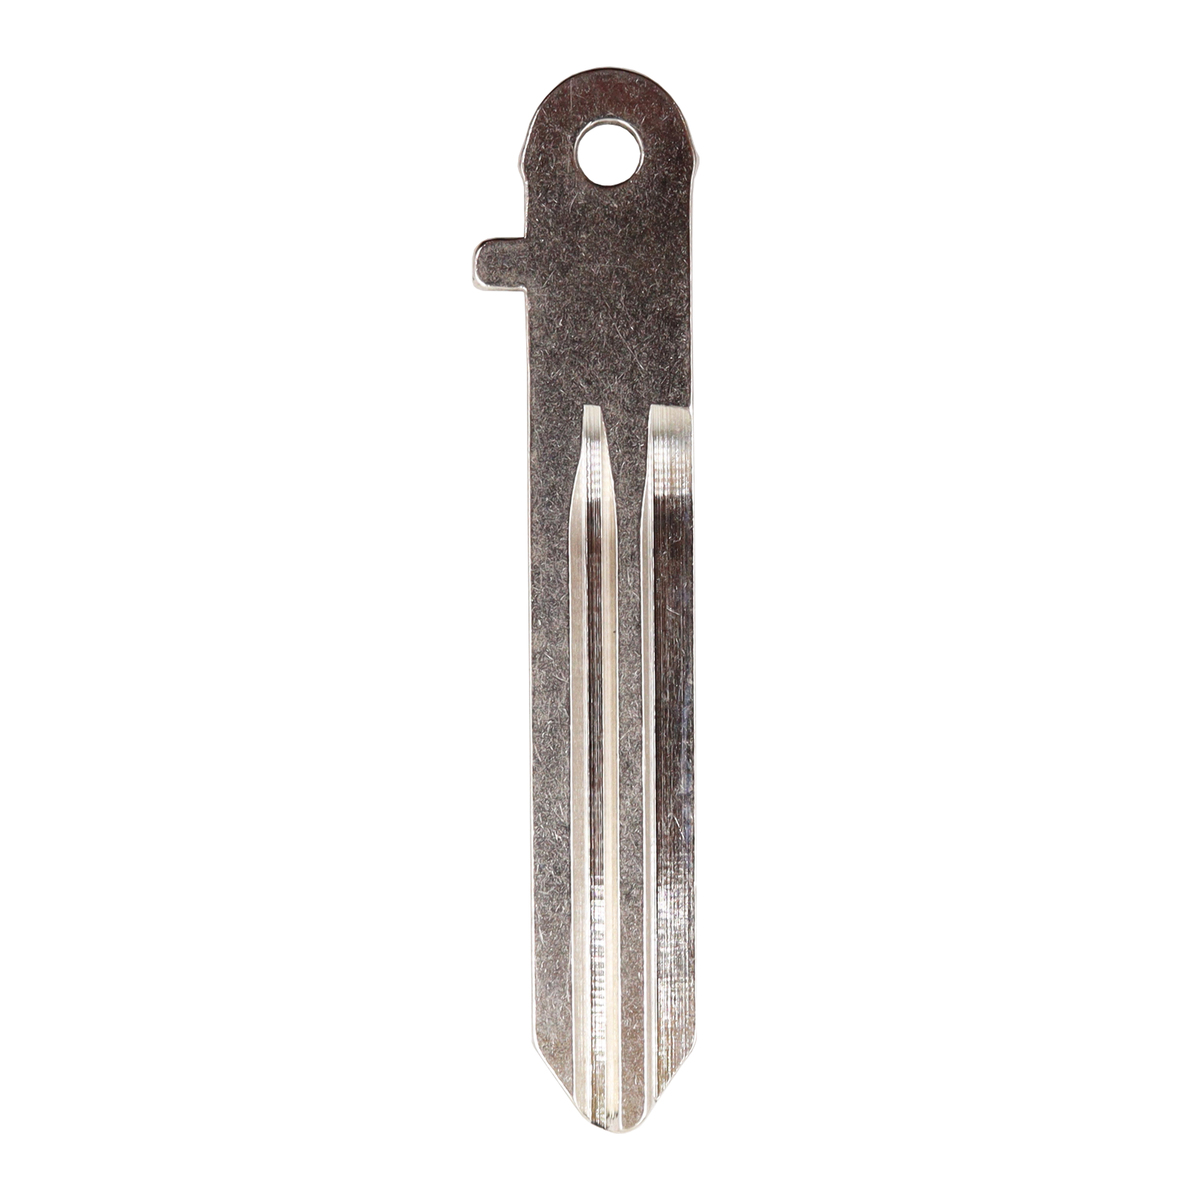 Nissan compatible replacement NSN14 Key Blade